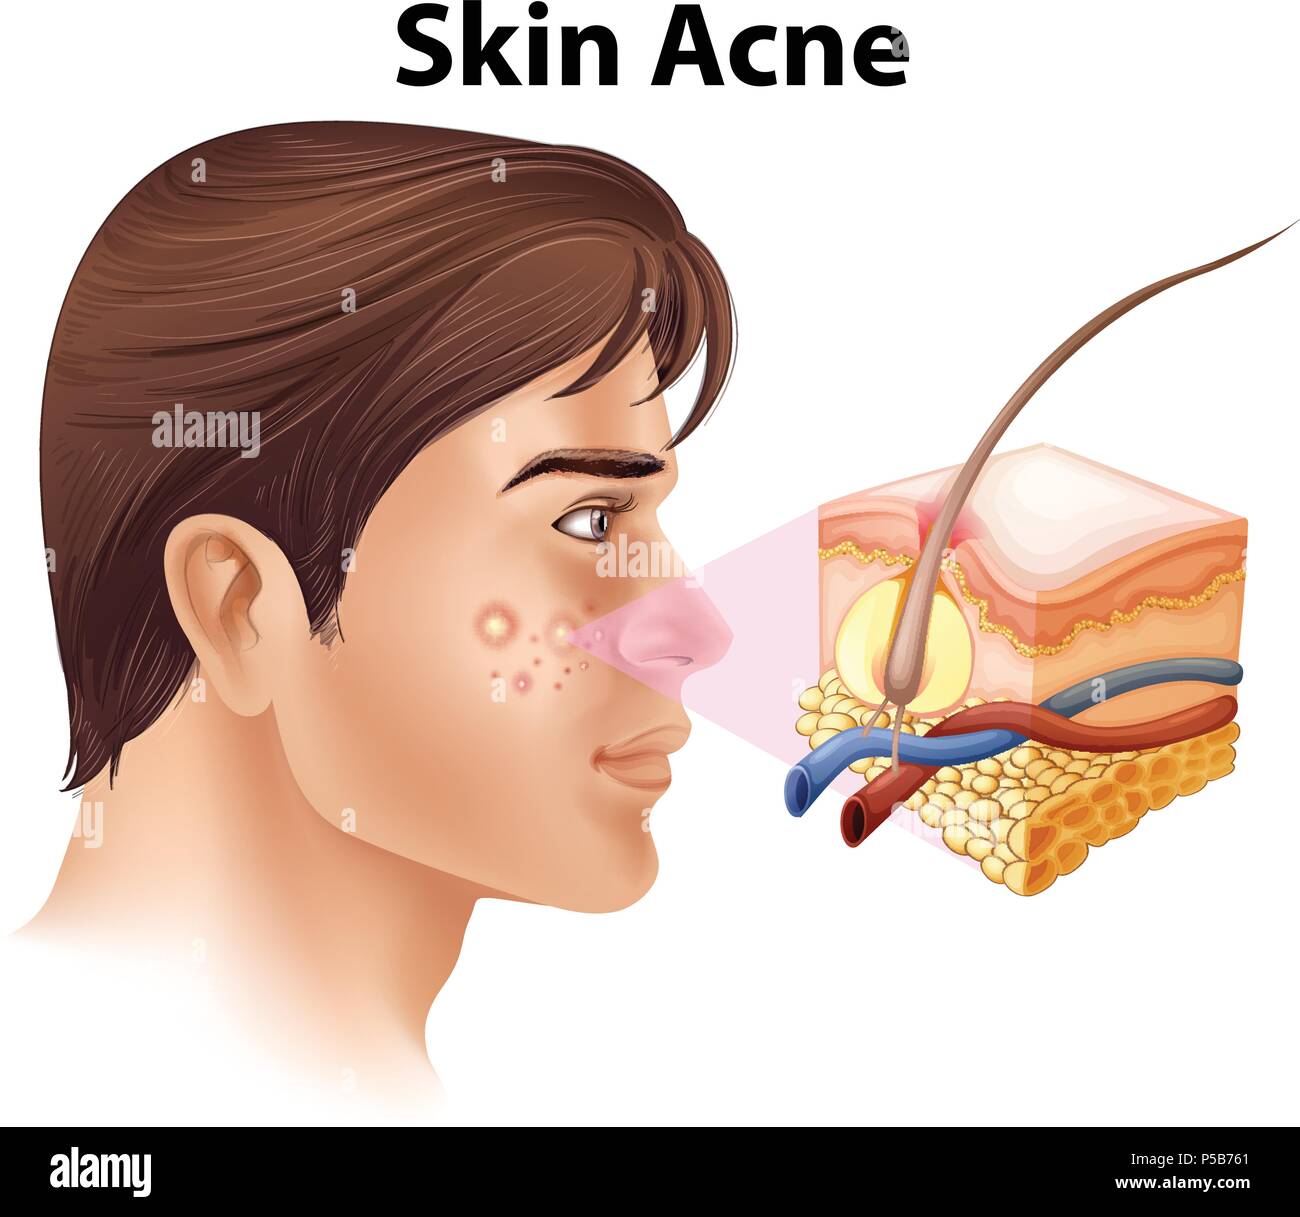 A Young Man with Acne Problem illustration Stock Vector